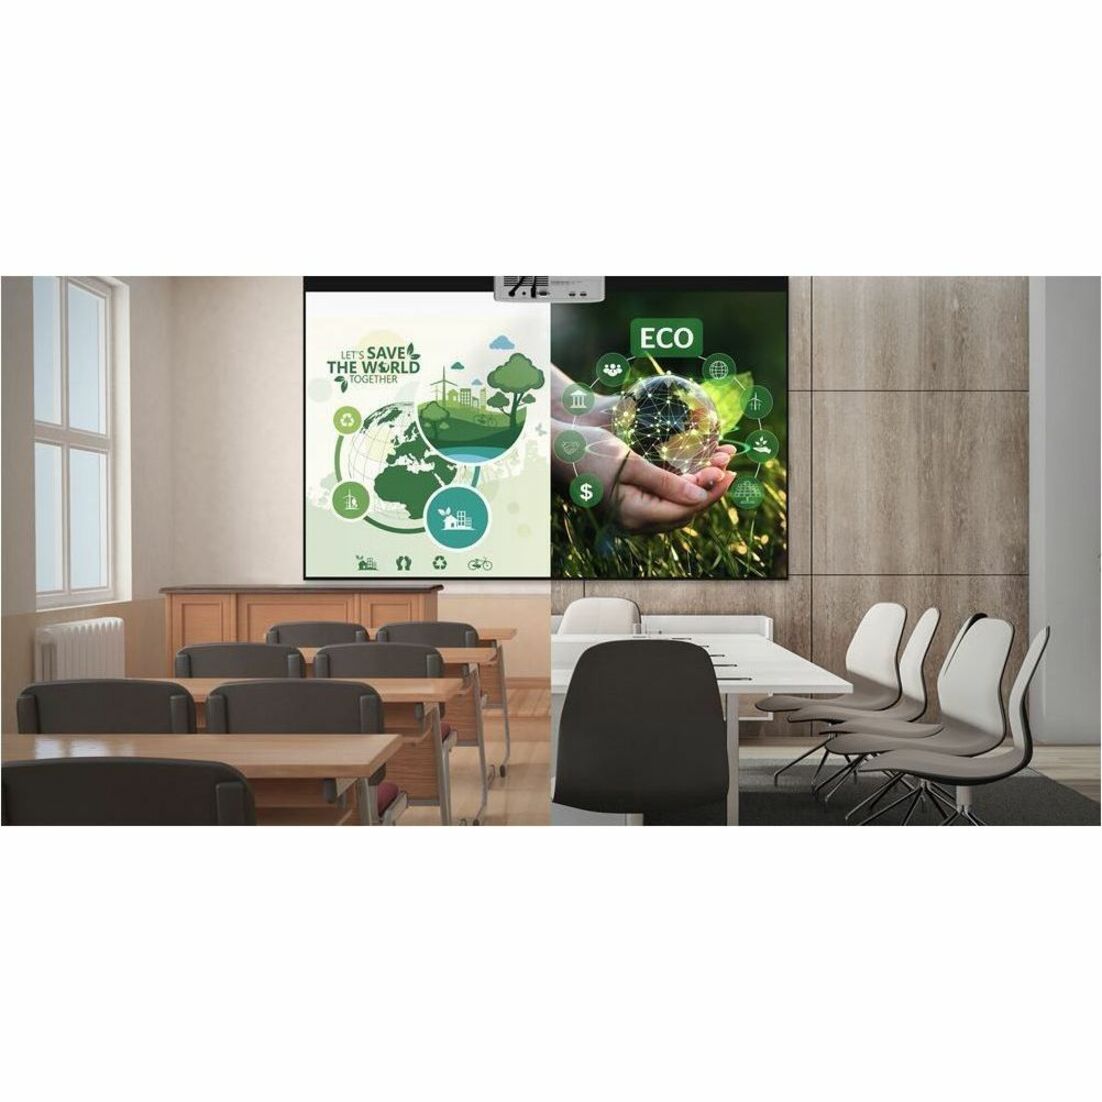 Optoma ZX350E ZX350e Compact High Brightness Laser Projector, 4:3 Aspect Ratio, 3700 lm, 300,000:1 Contrast Ratio, 1080p Output